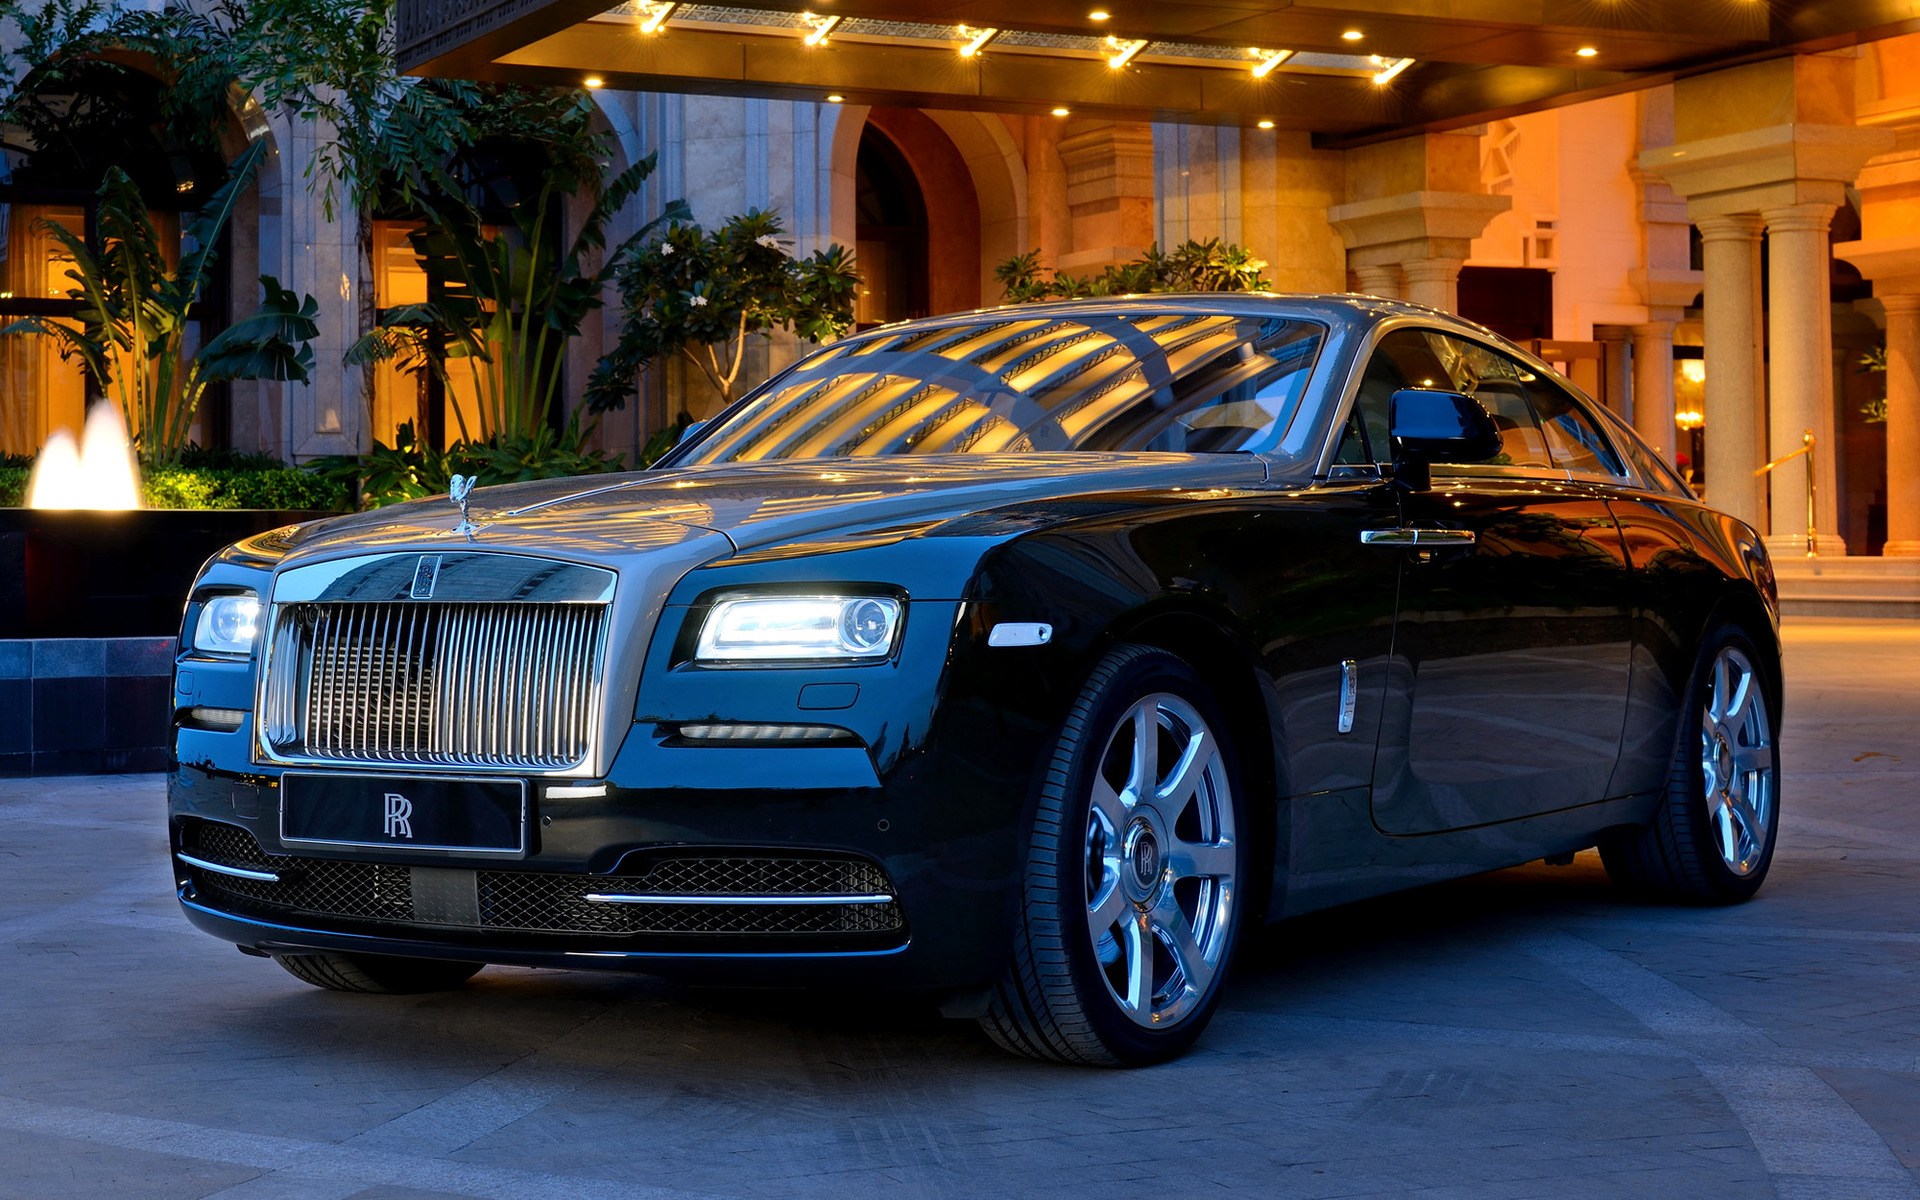 2013 Rolls Royce Wraith Wallpapers And Hd Images Car - Rolls-royce Wraith , HD Wallpaper & Backgrounds